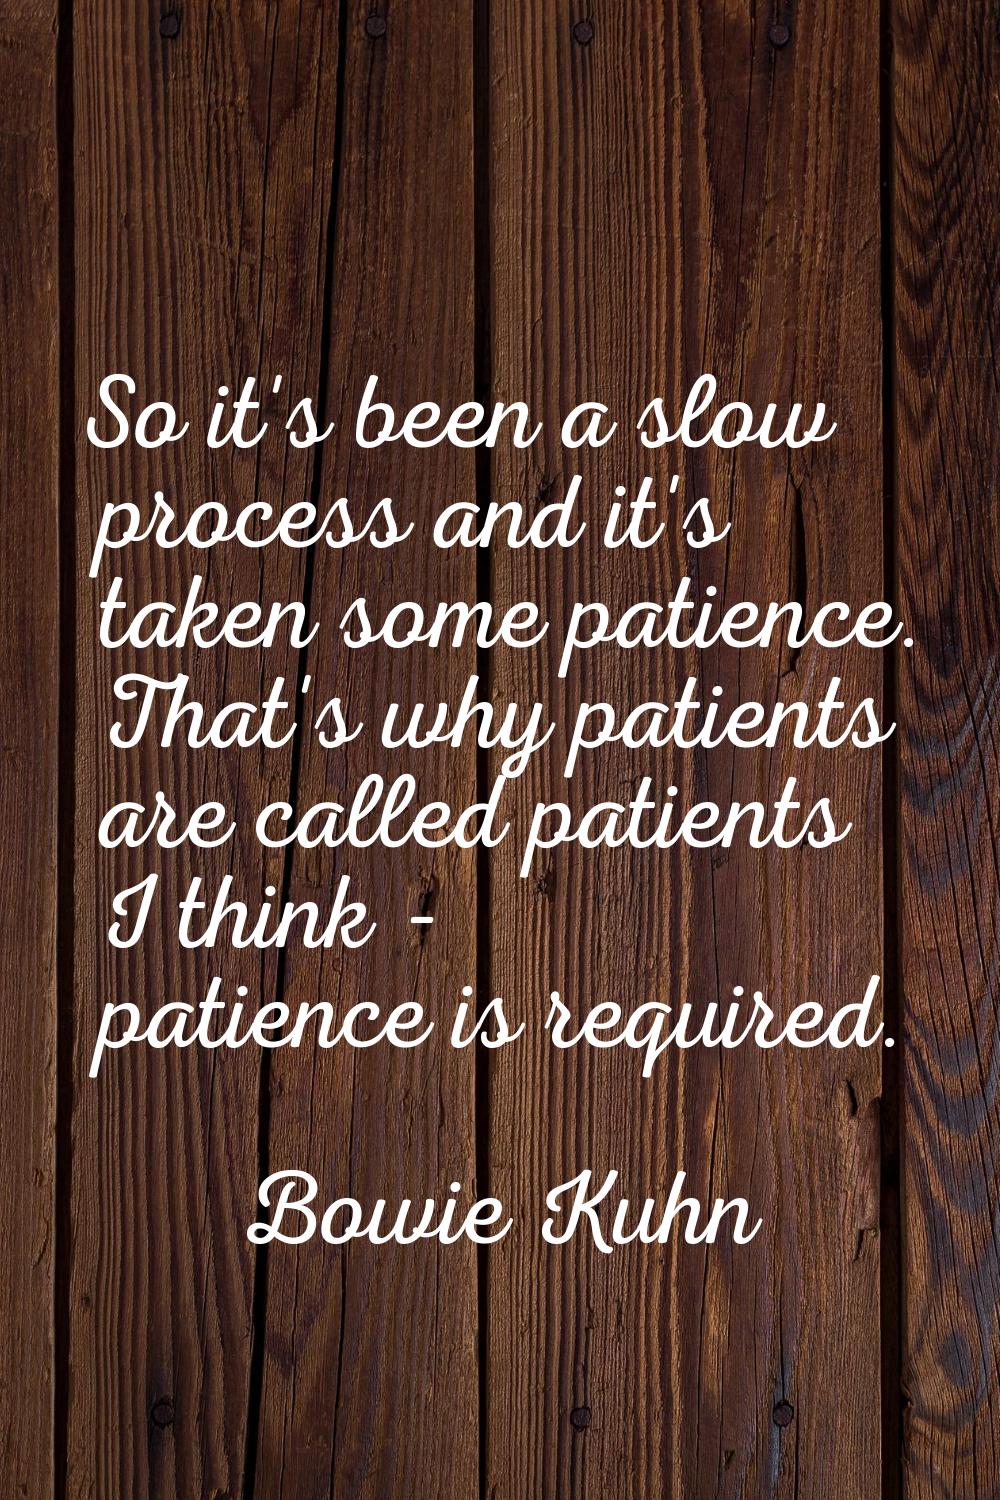 So it's been a slow process and it's taken some patience. That's why patients are called patients I